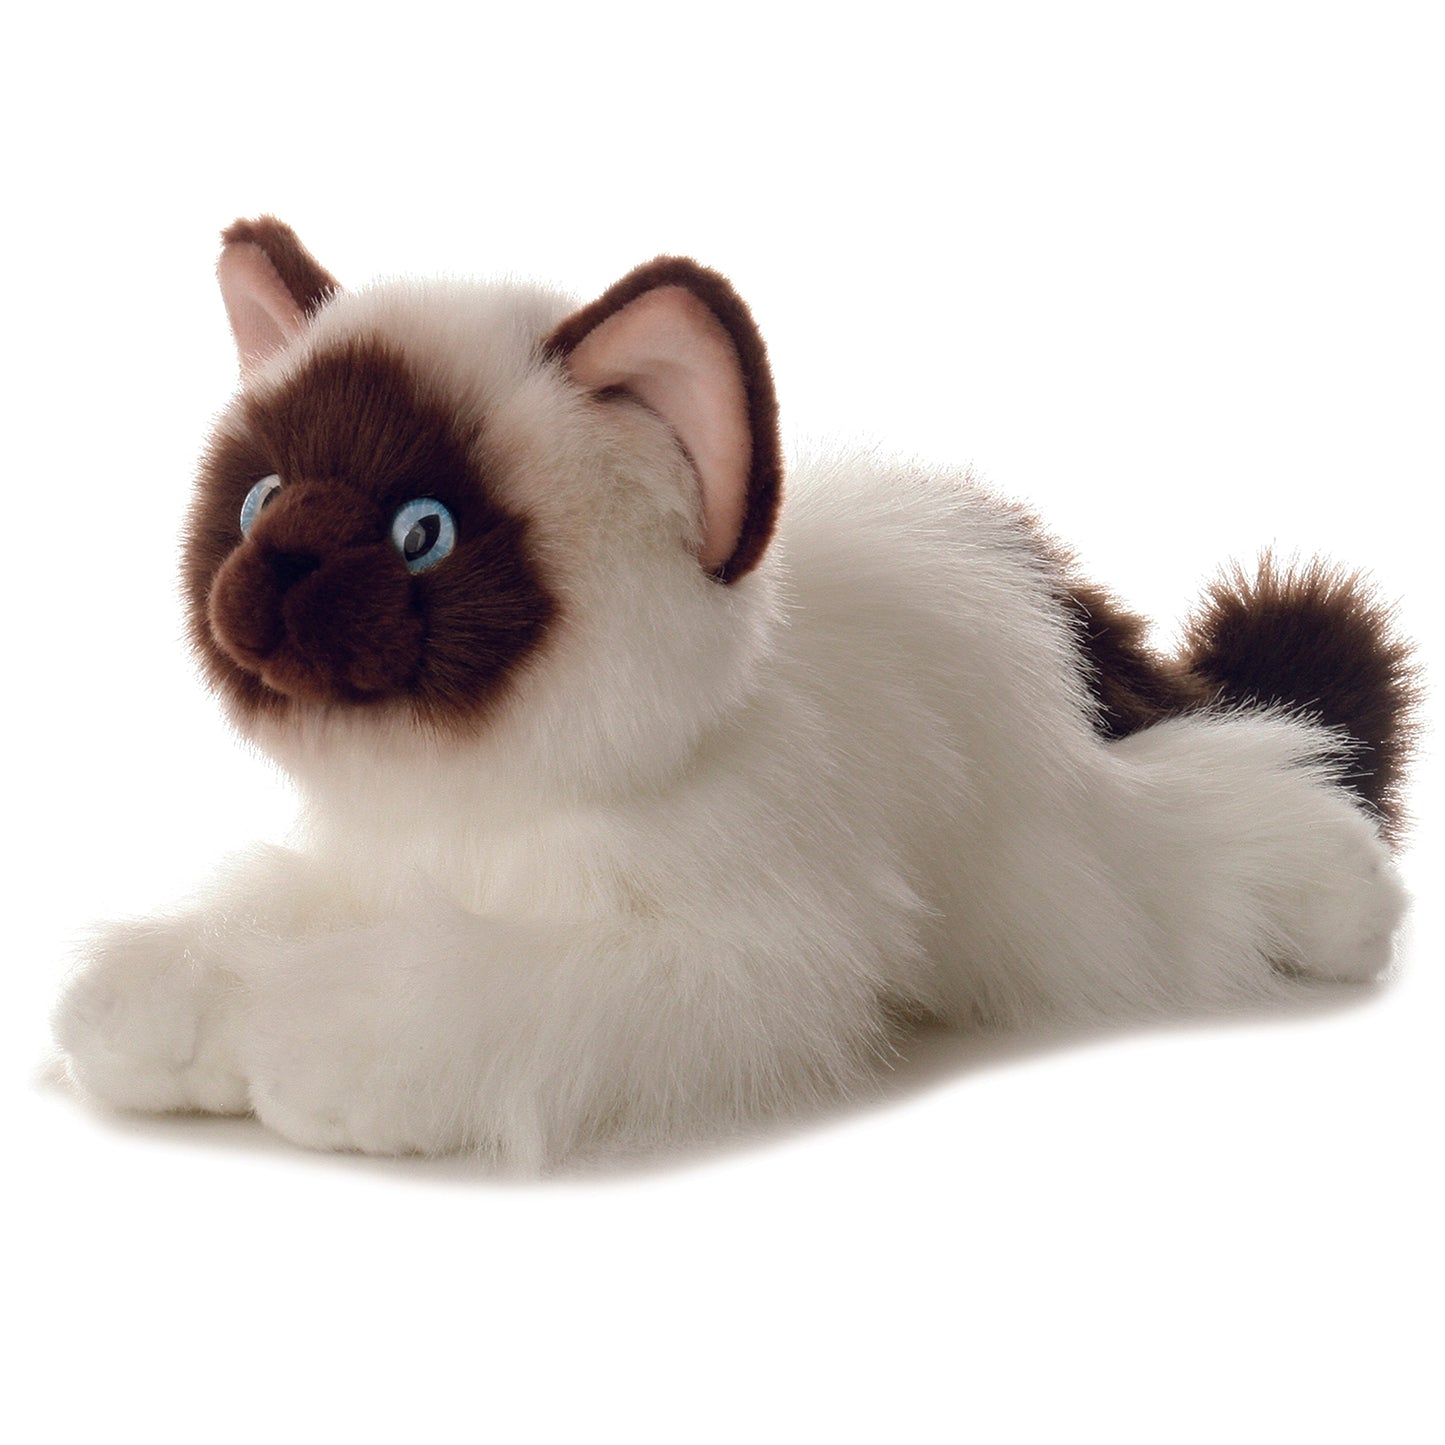 With a chocolate face, tail, and ears, Bella the 12 inch long Birman Cat will steal your heart. Her coat is fluffy and white, her ears are pink, and her eyes striking blue.  We just cant wait to give this little kitty a snuggle!